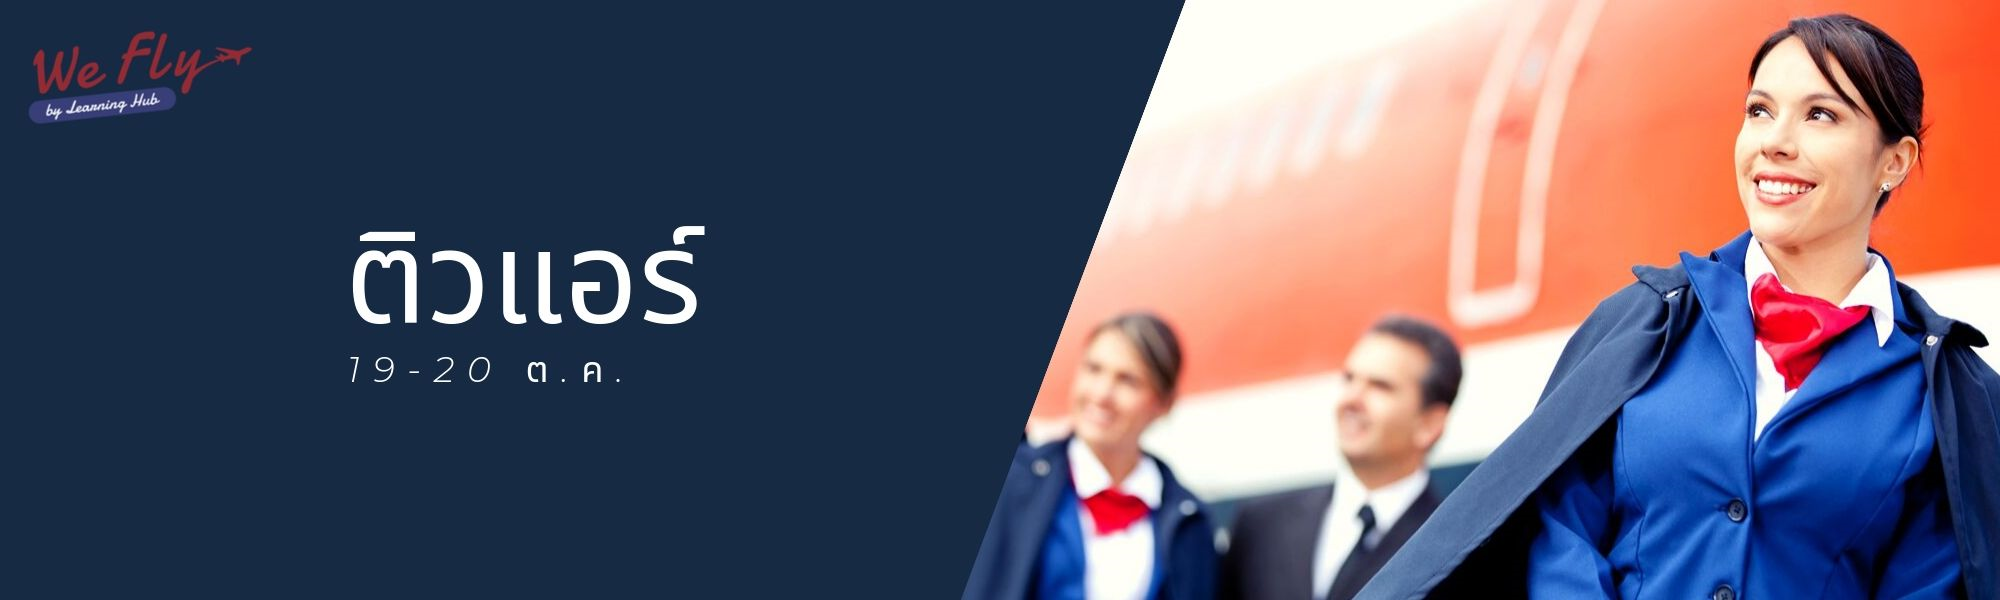 WeFly Cabin Crew Short Course